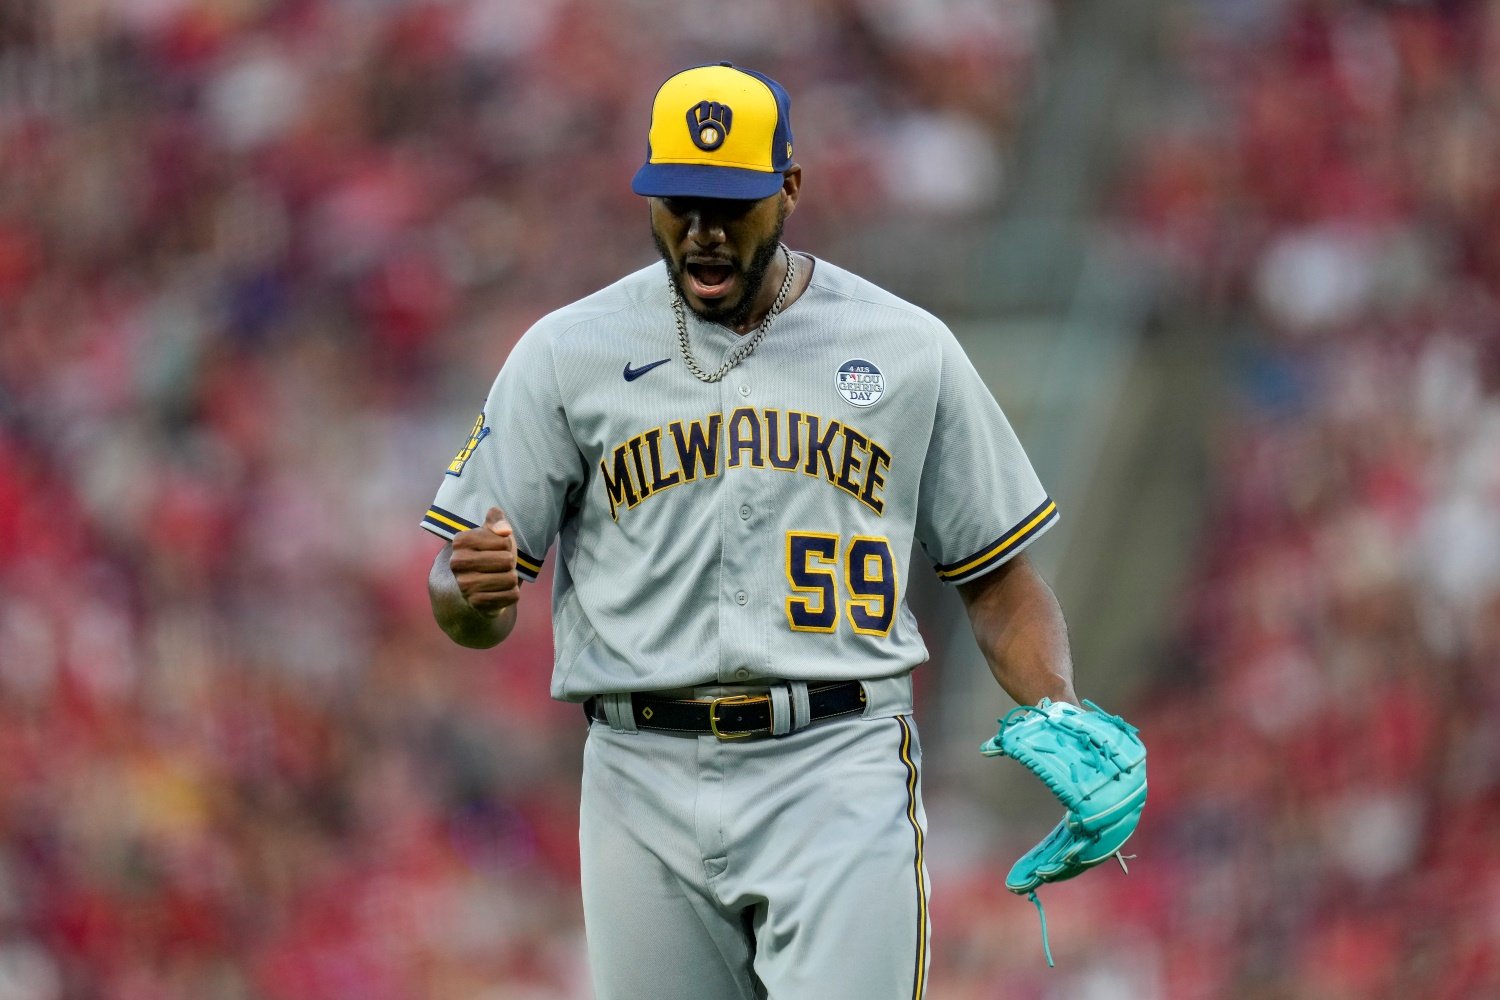 Don't Look Now, but the Brewers Have a Very Rays-Like Bullpen